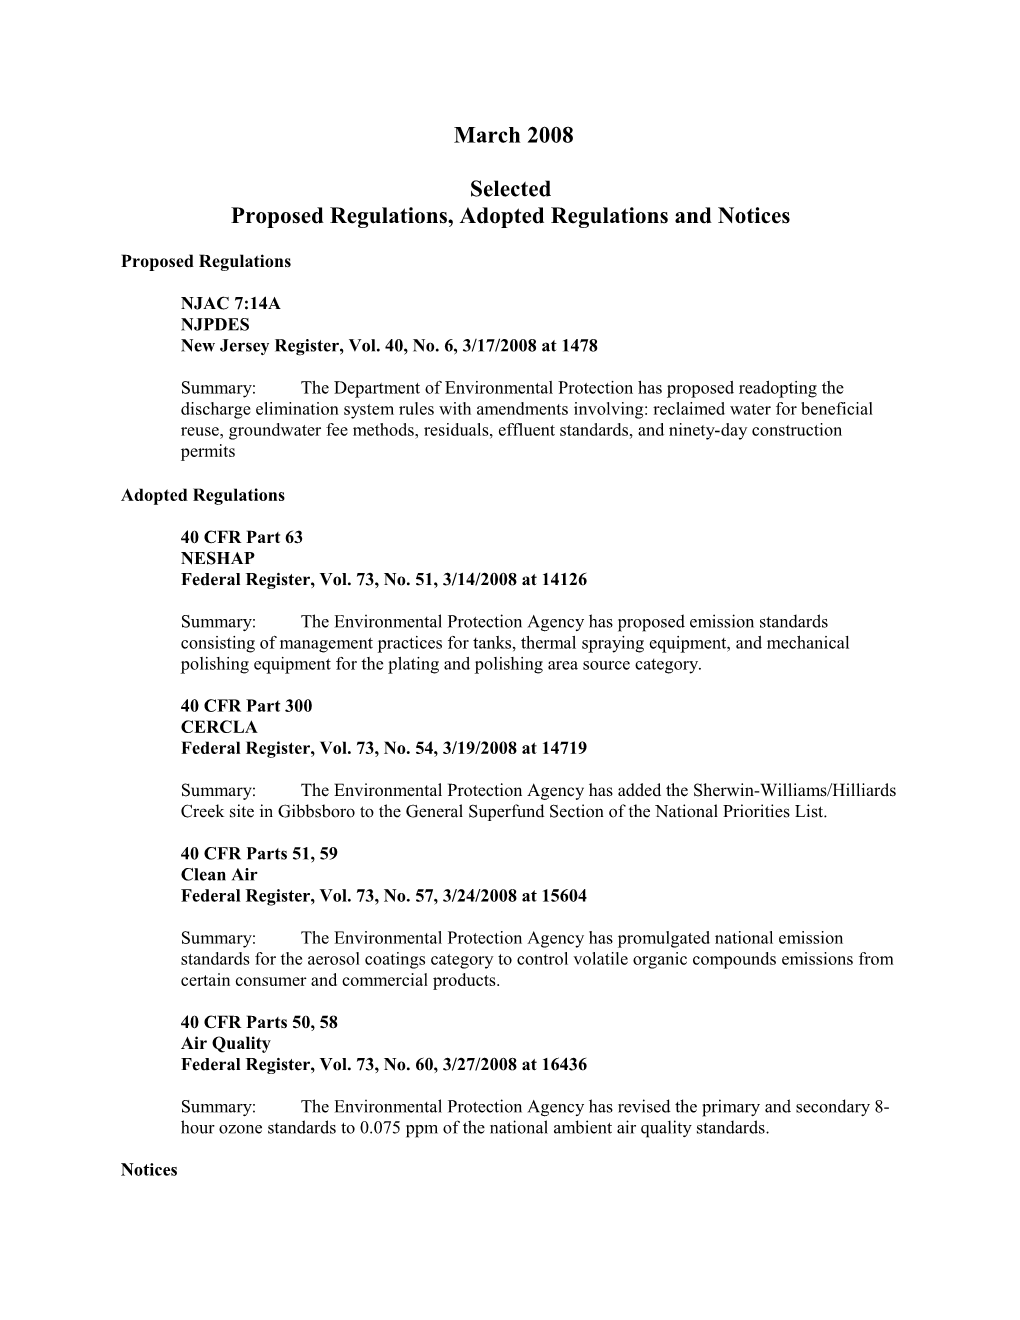 Proposed Regulations, Adopted Regulations and Notices s1